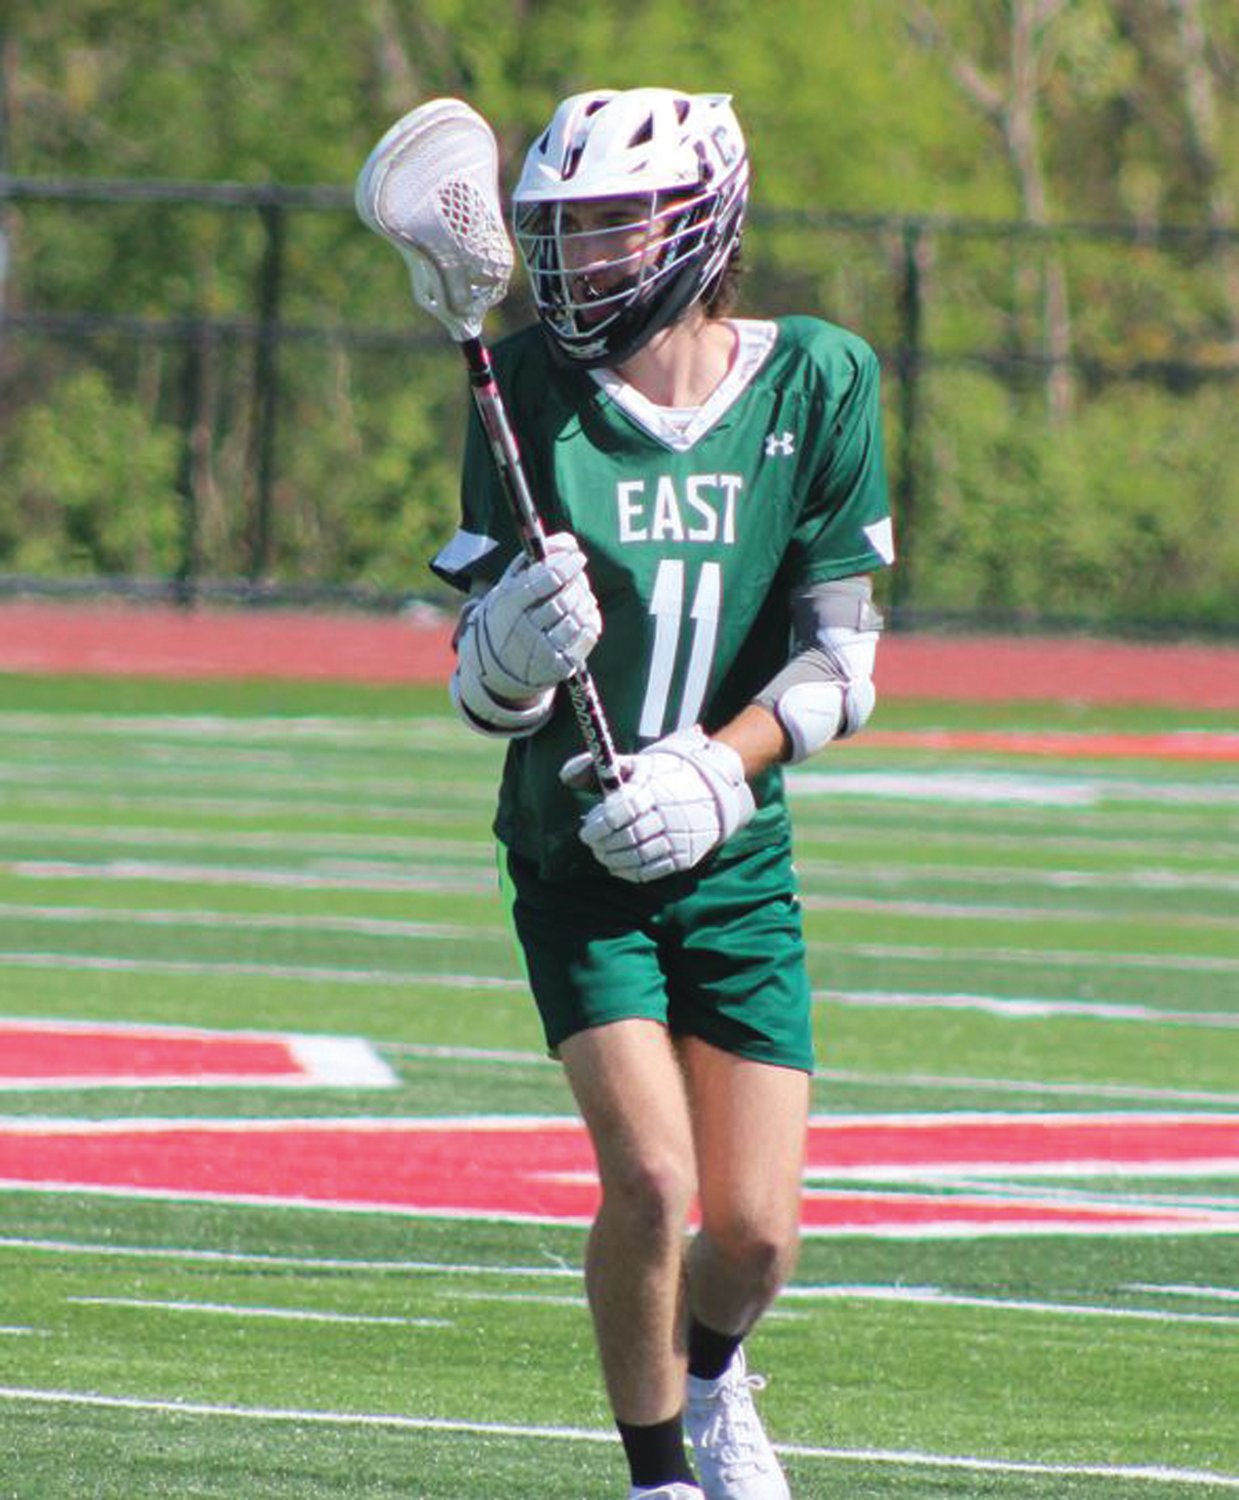 MIDDIE: East midfielder Kale Benton takes the ball up the field.